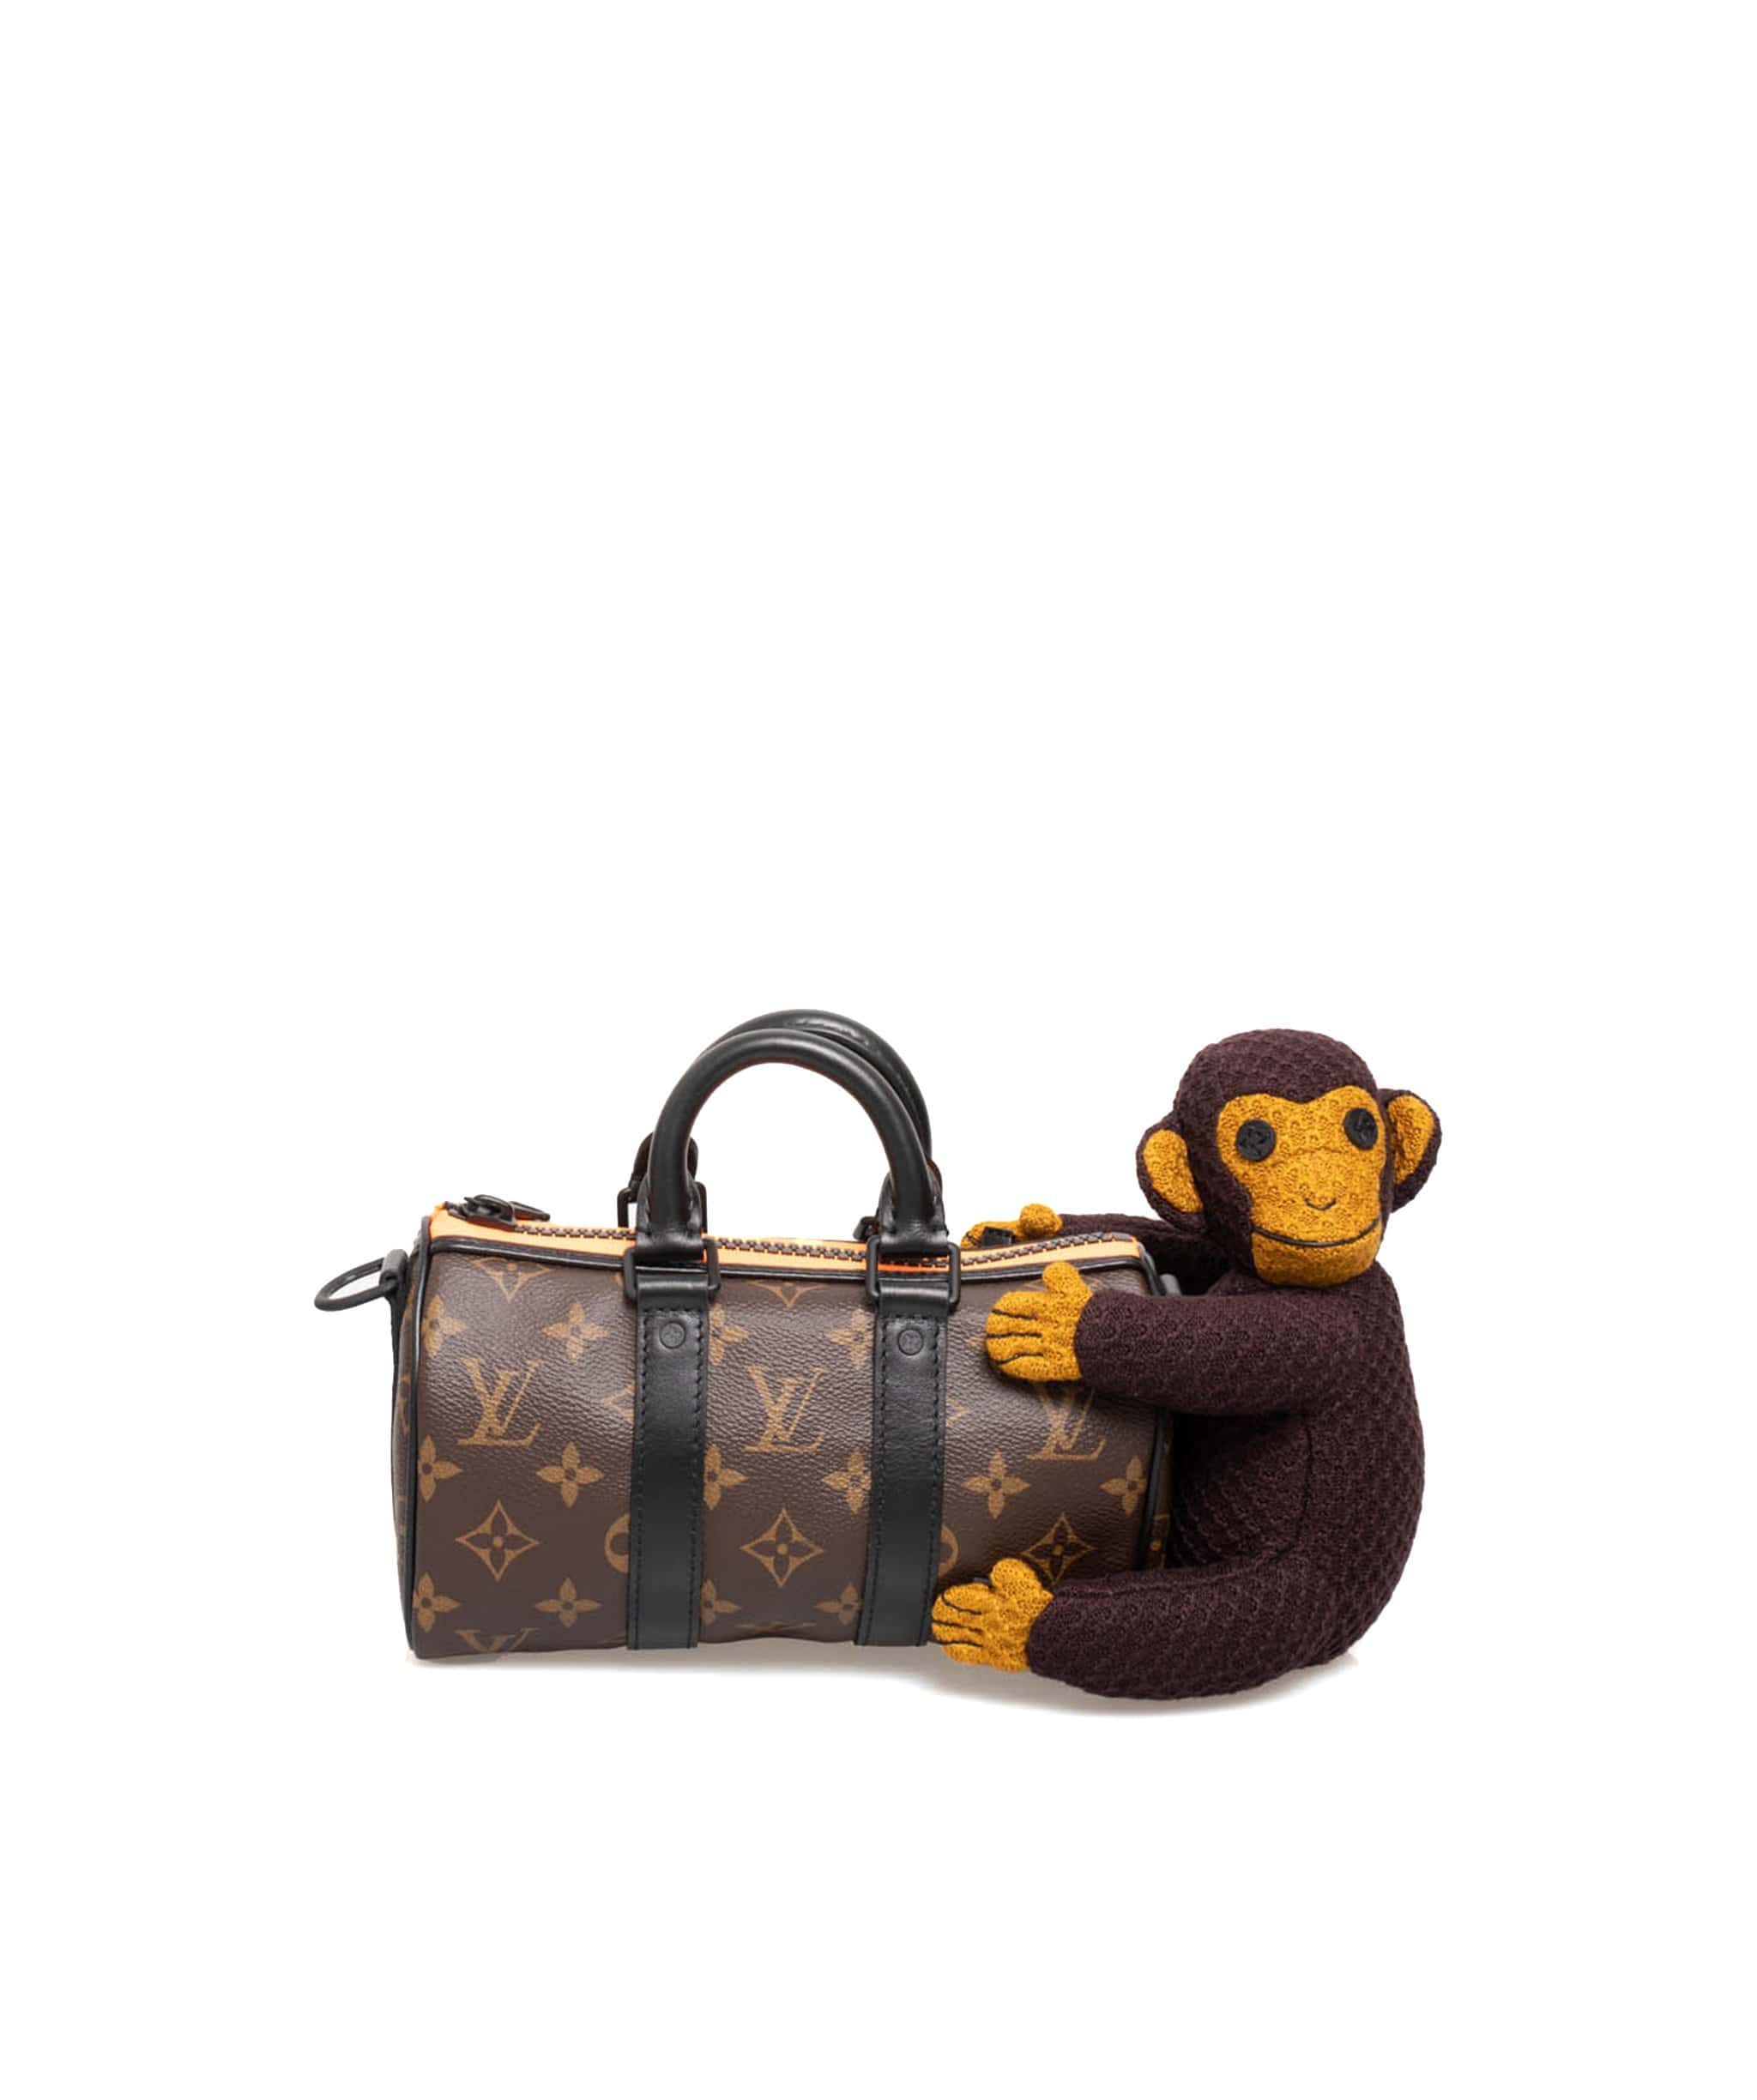 Limited Edition!! BRANDNEW Louis Vuitton KEEPALL XS with dustbag